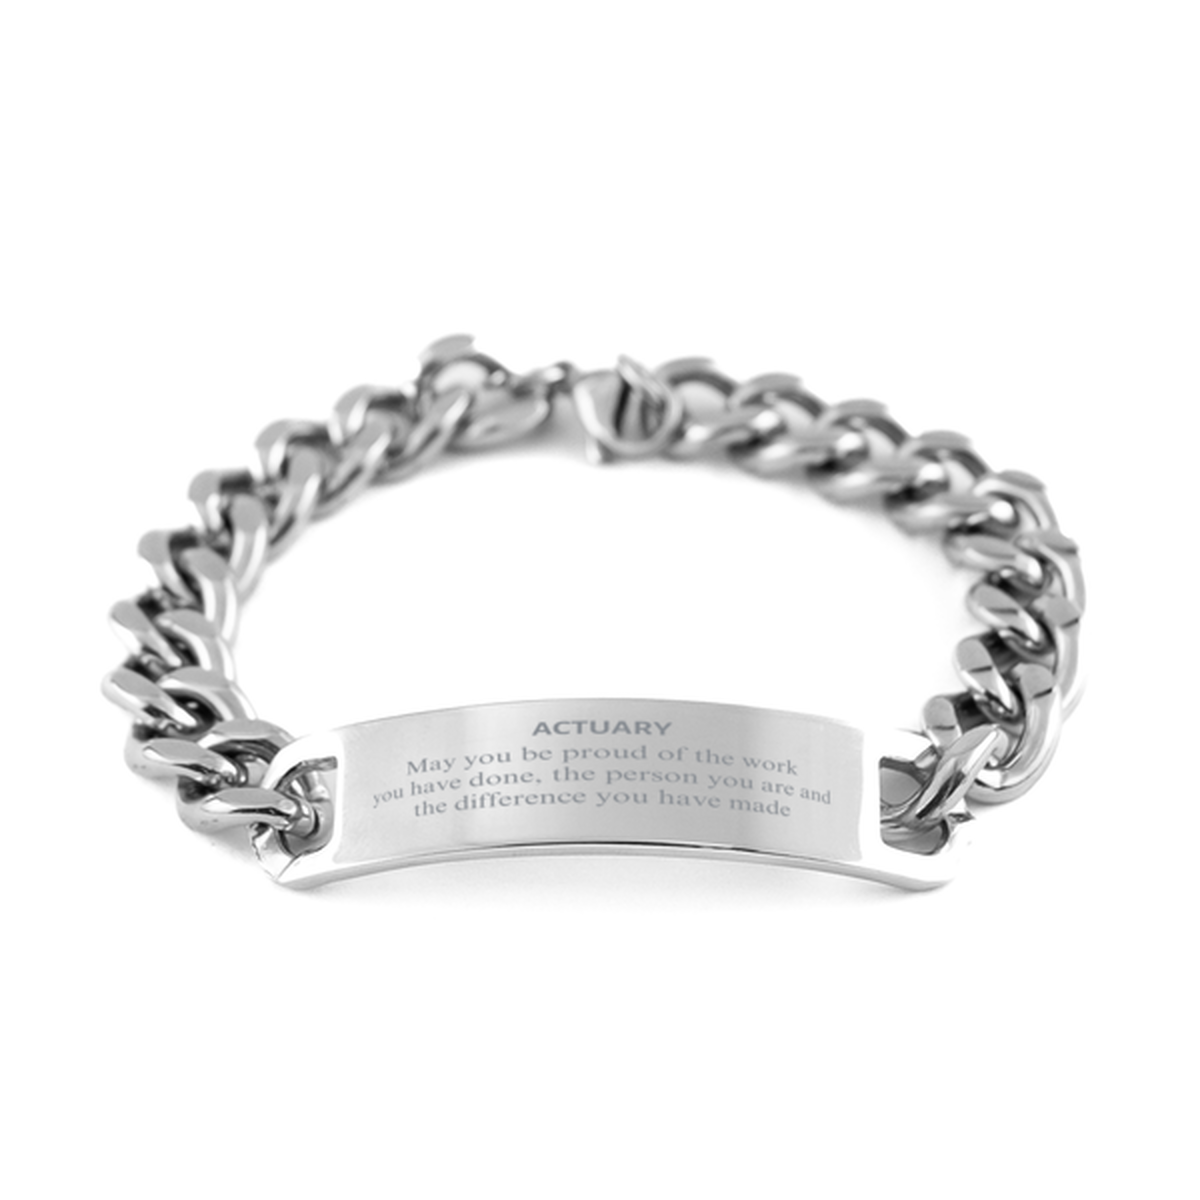 Actuary May you be proud of the work you have done, Retirement Actuary Cuban Chain Stainless Steel Bracelet for Colleague Appreciation Gifts Amazing for Actuary